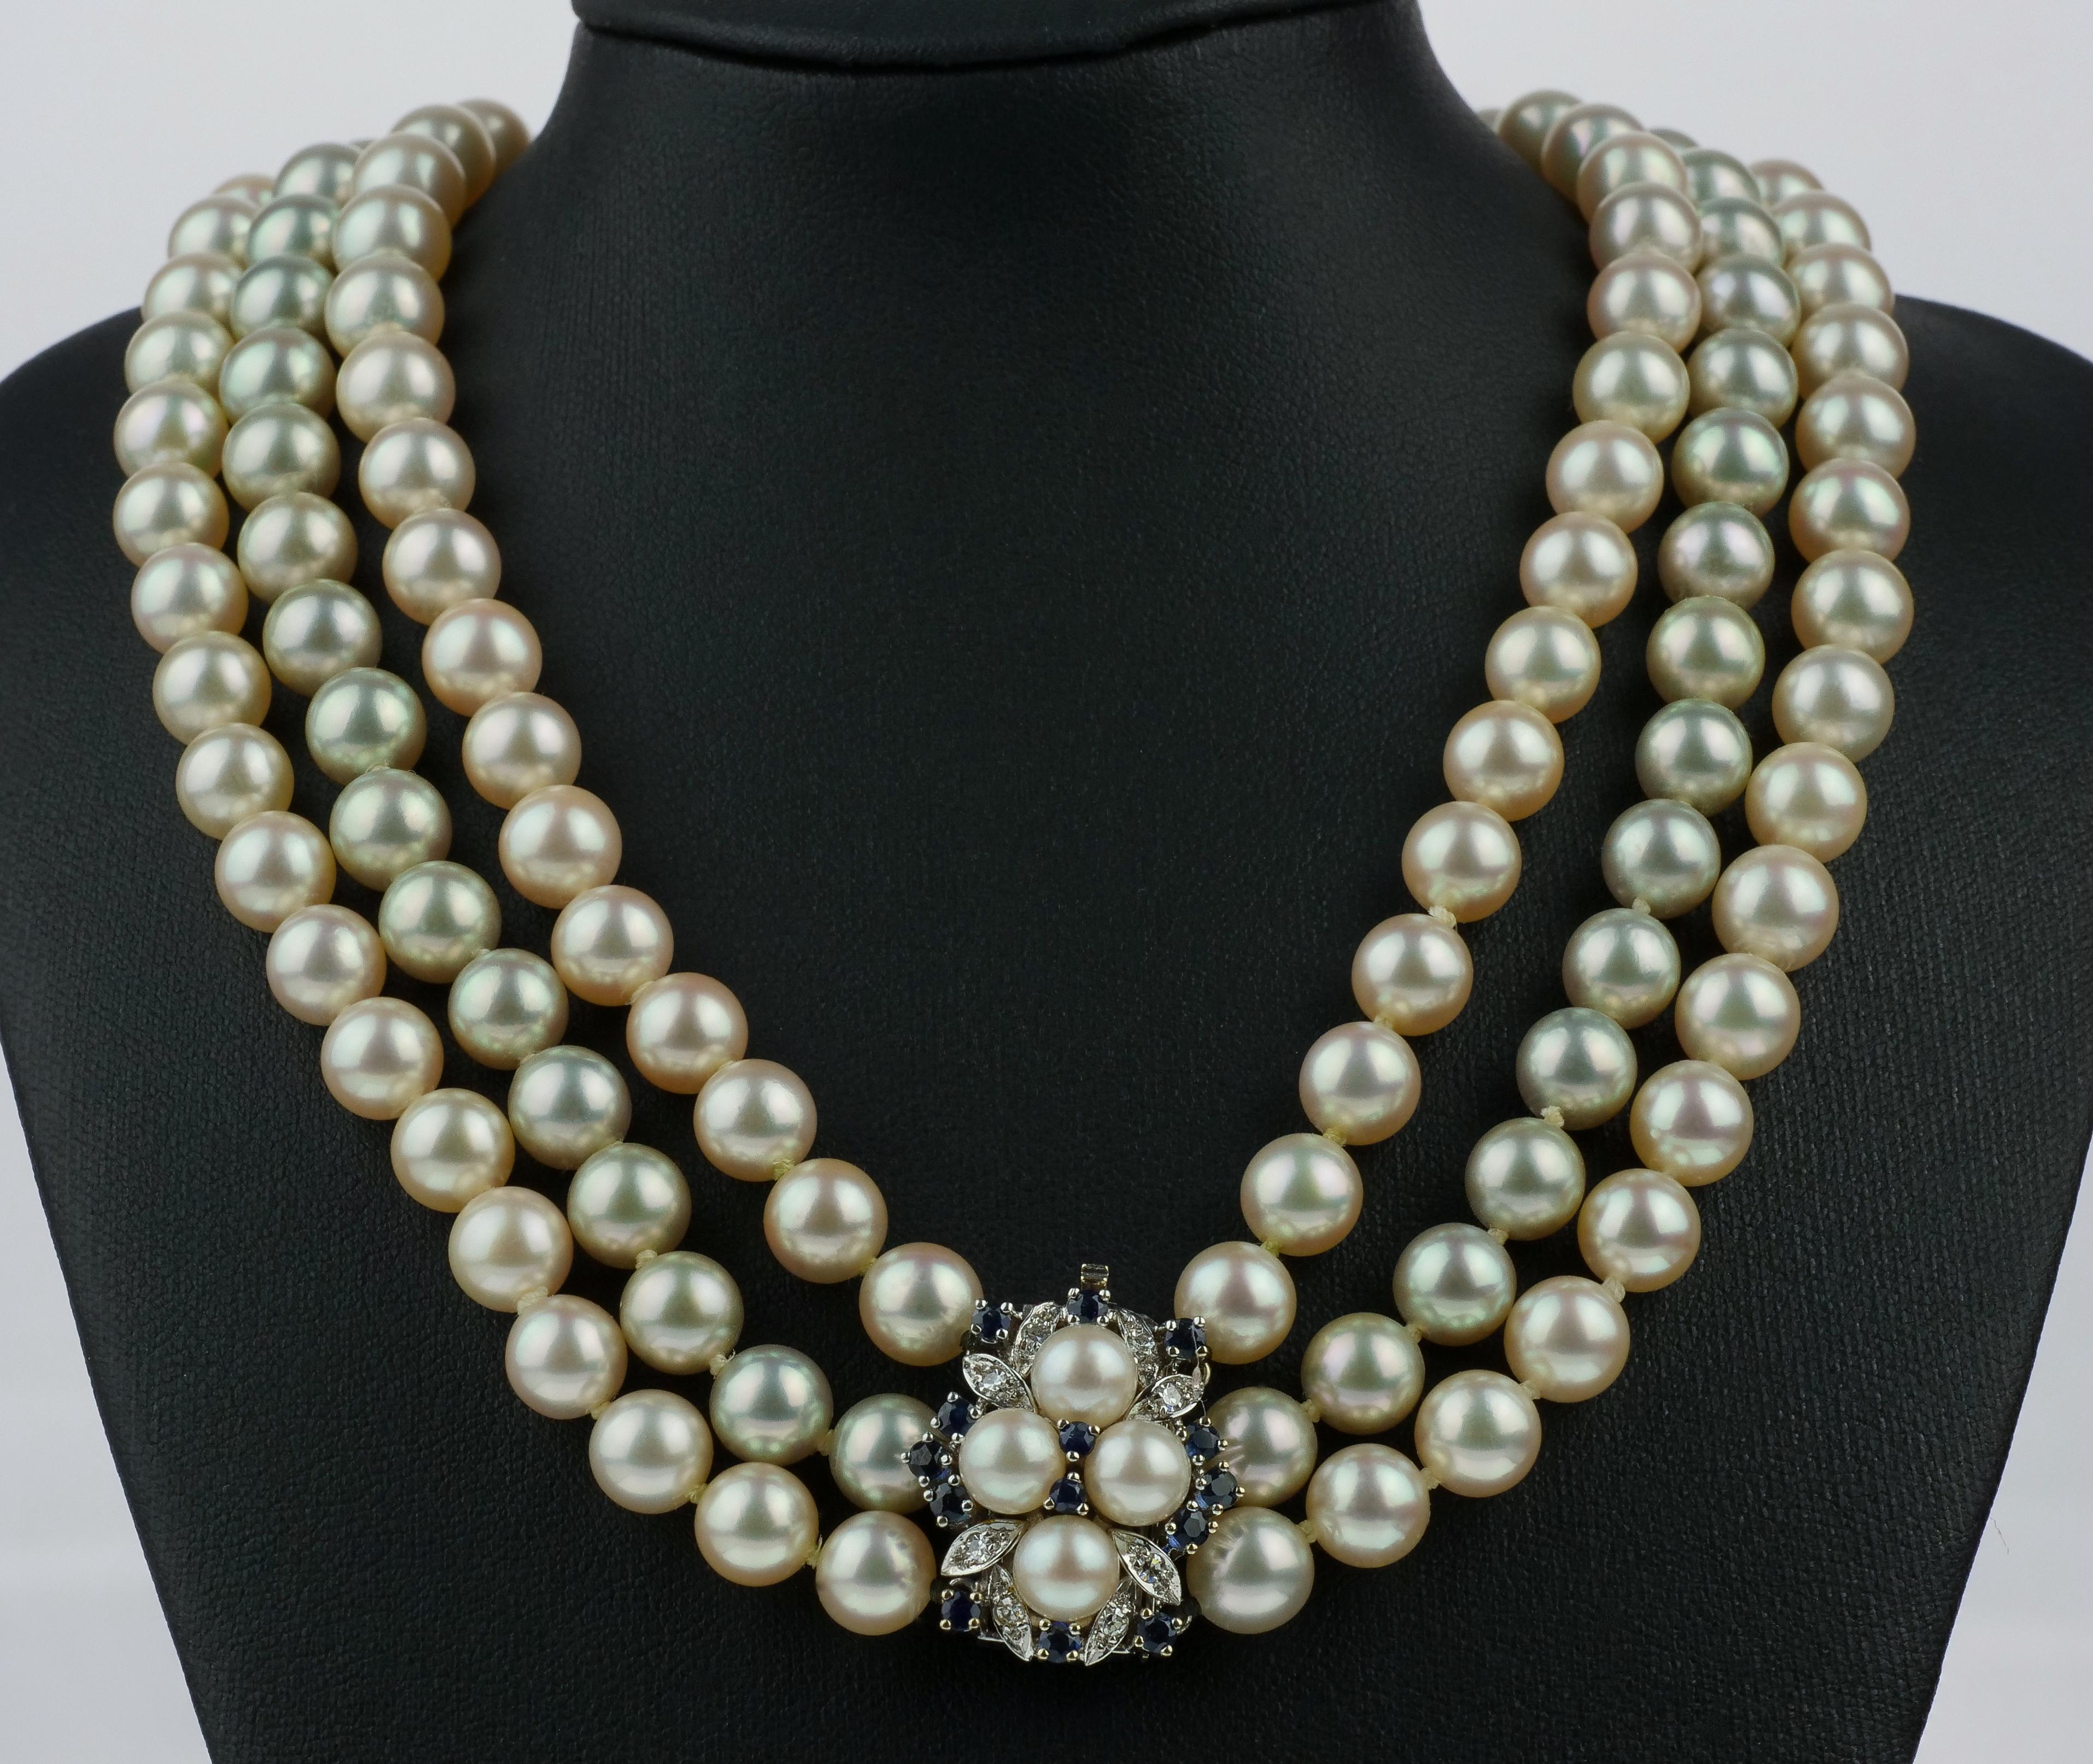 Modern Bespoke Three-Row Akoya Pearl Necklace with Diamond and Sapphire Clasp For Sale